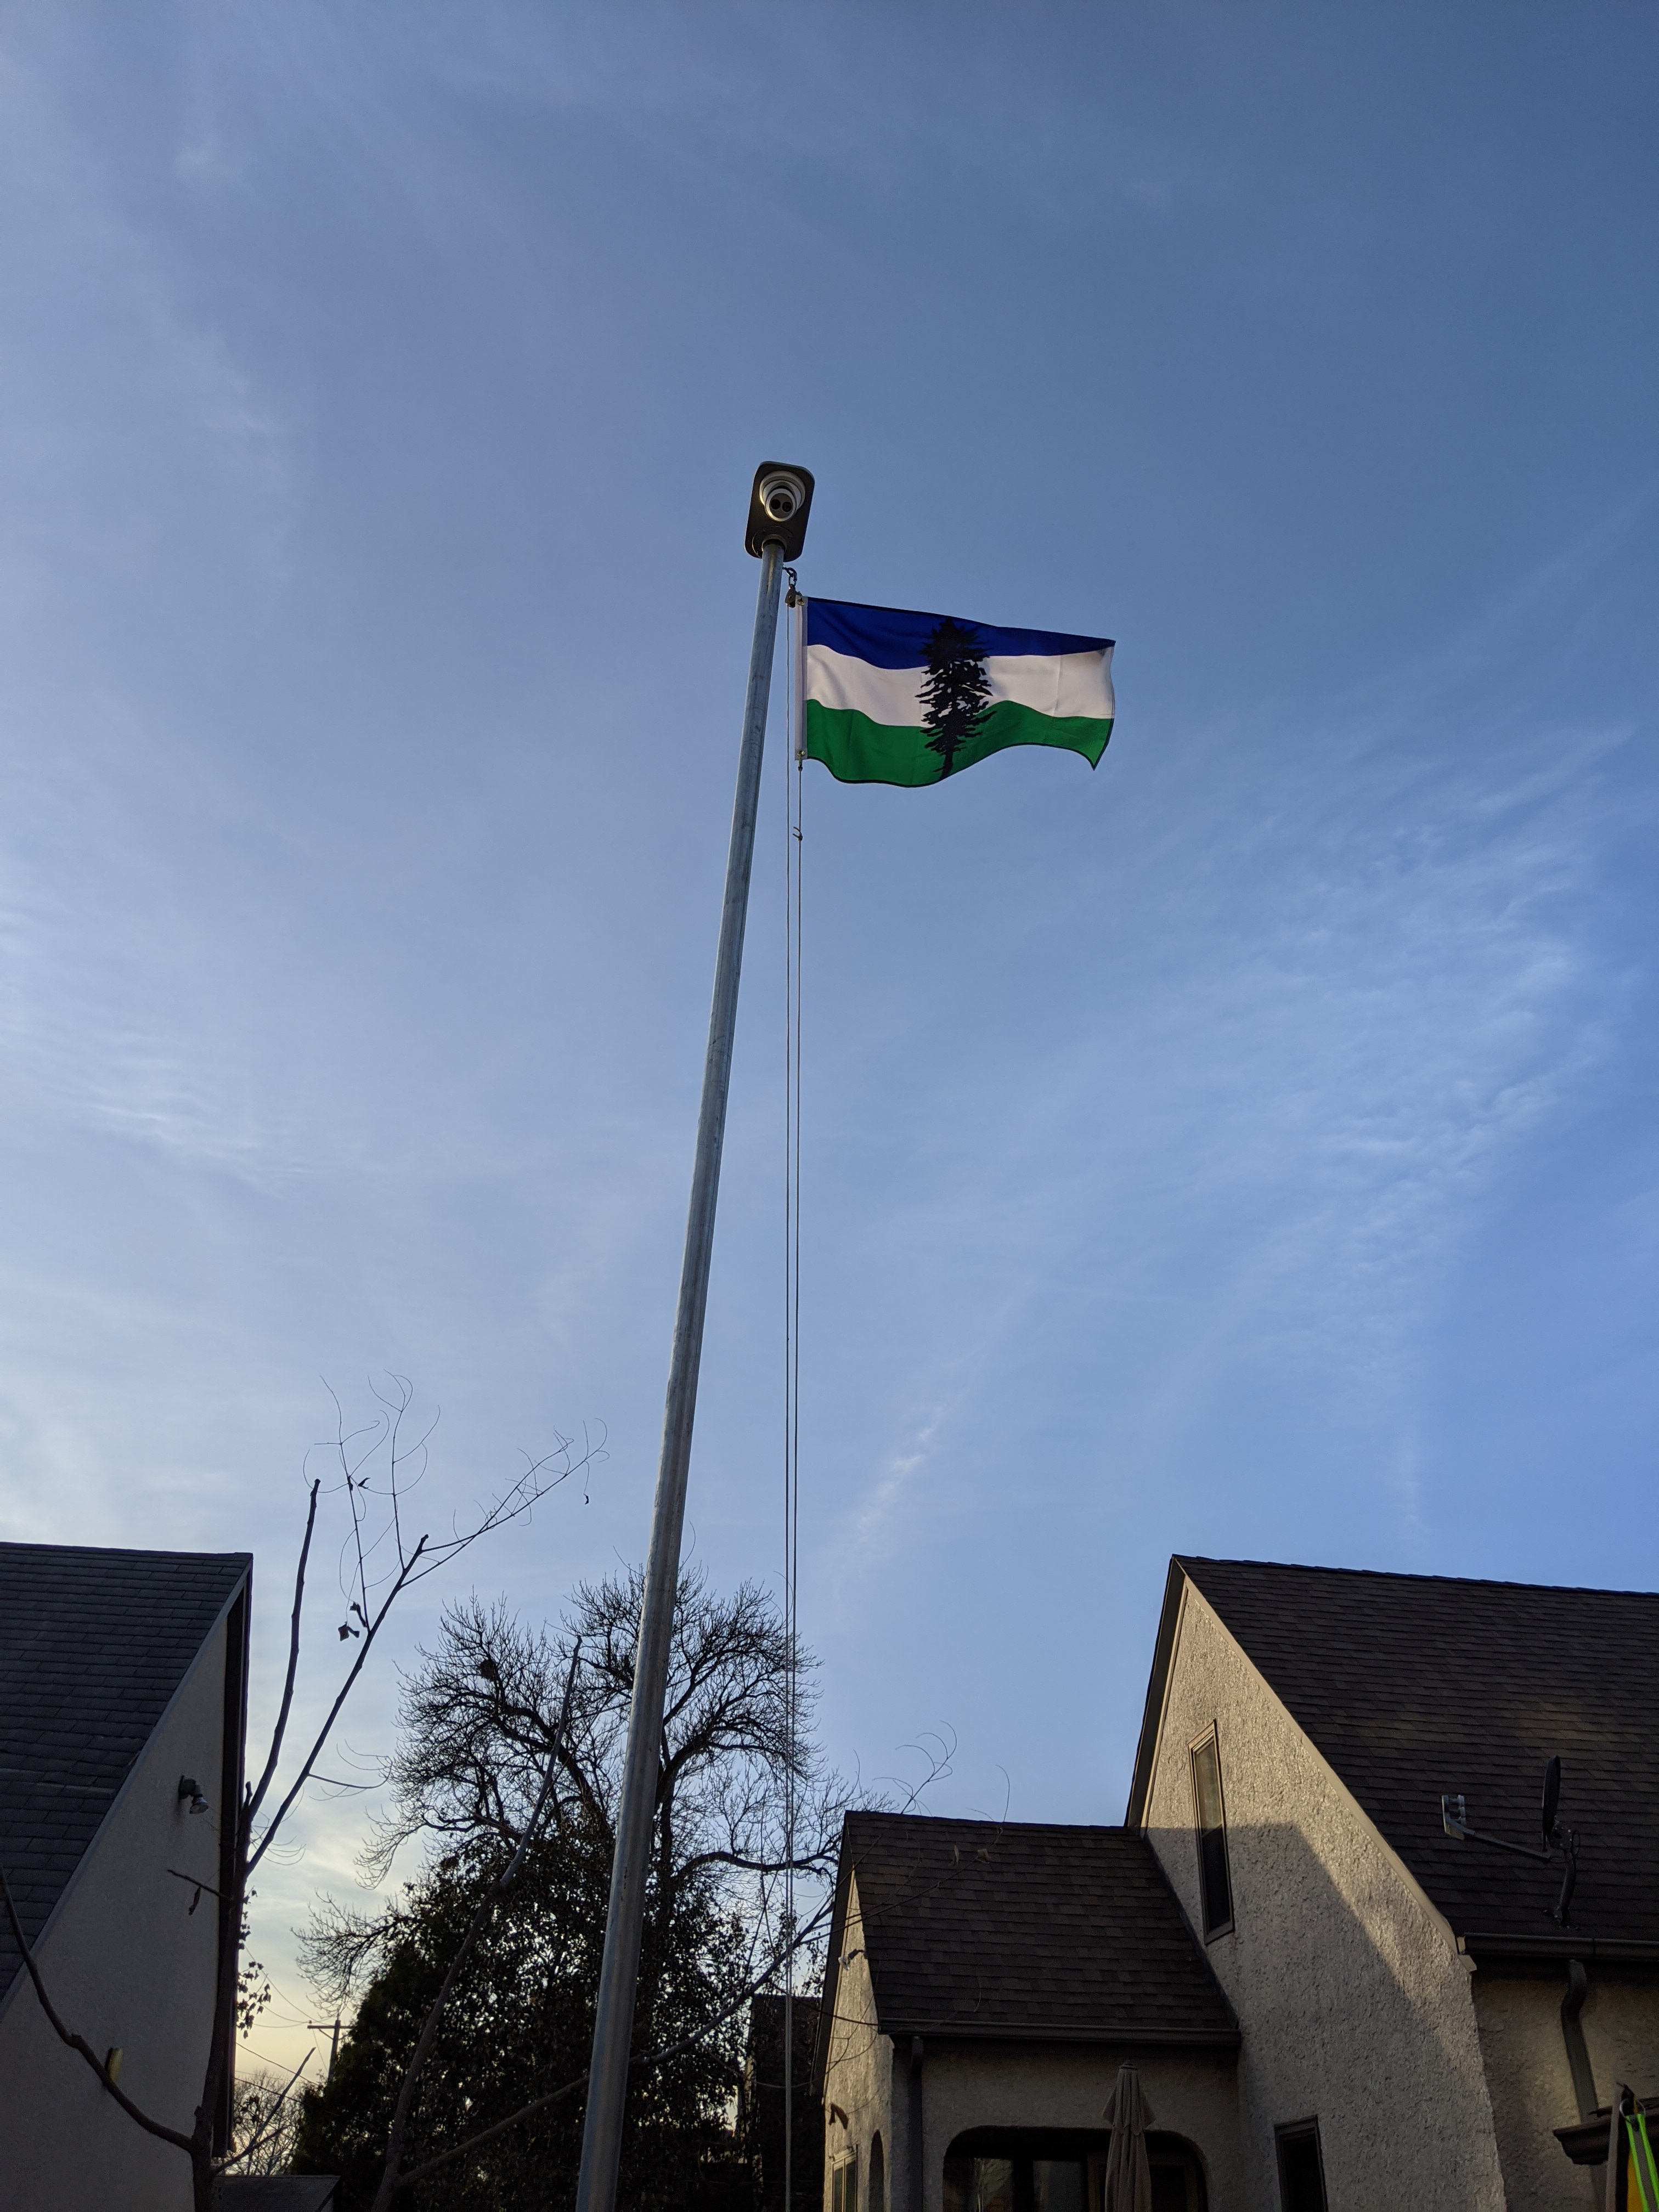 etree_flagpole_is_vertical_and_the_flag_raised_photo